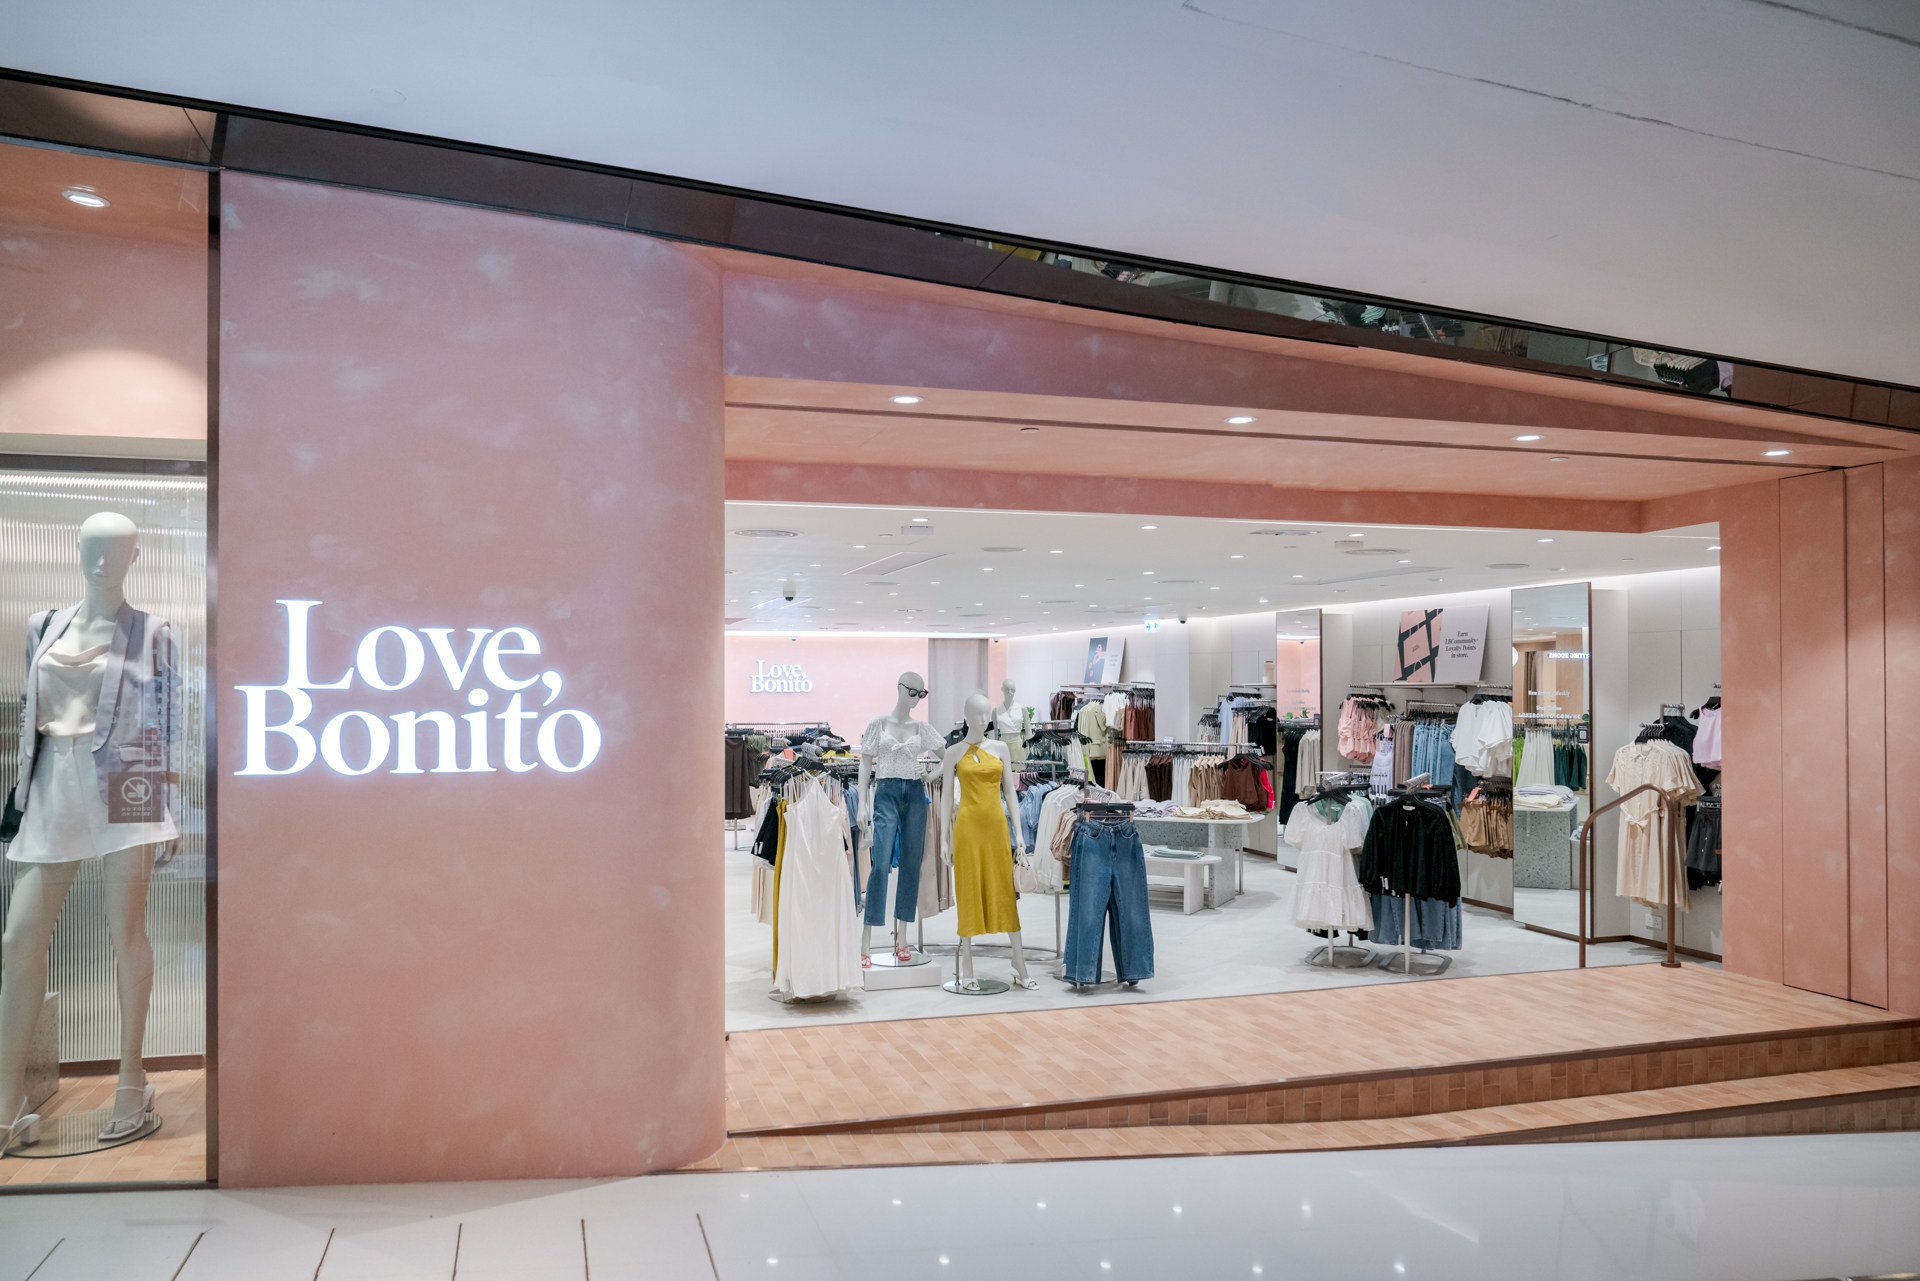 Love, Bonito expands global reach with first pop-up store in the US